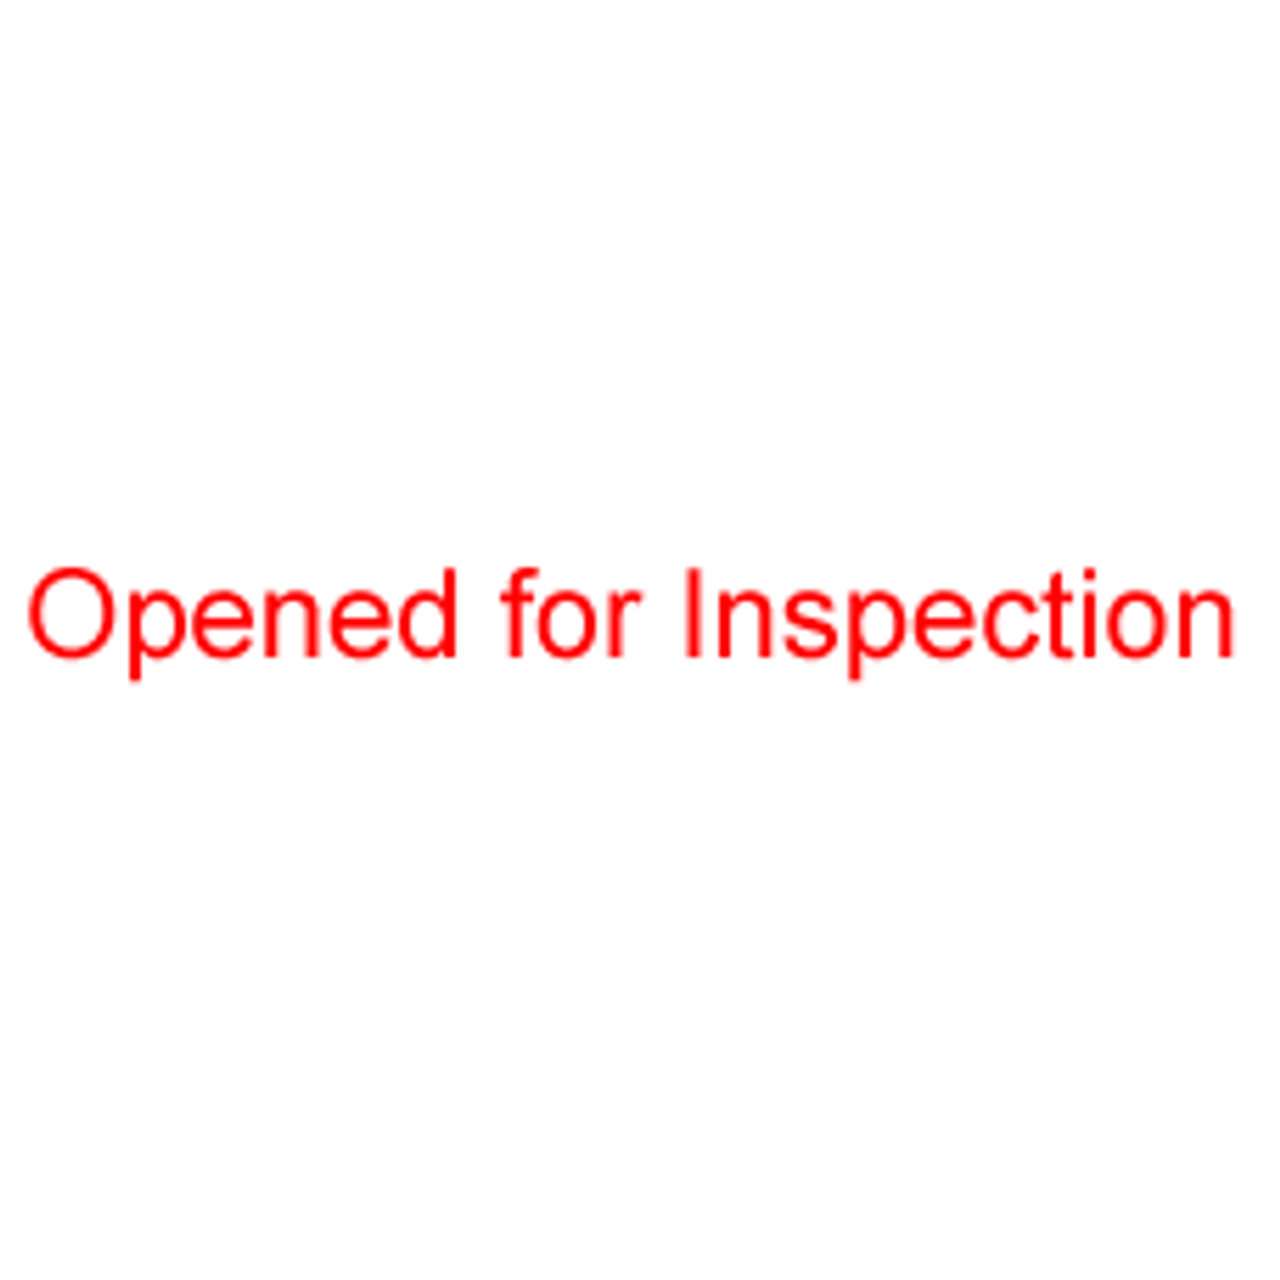 OPENED FOR INSPECTION Rubber Stamp for mail use self-inking